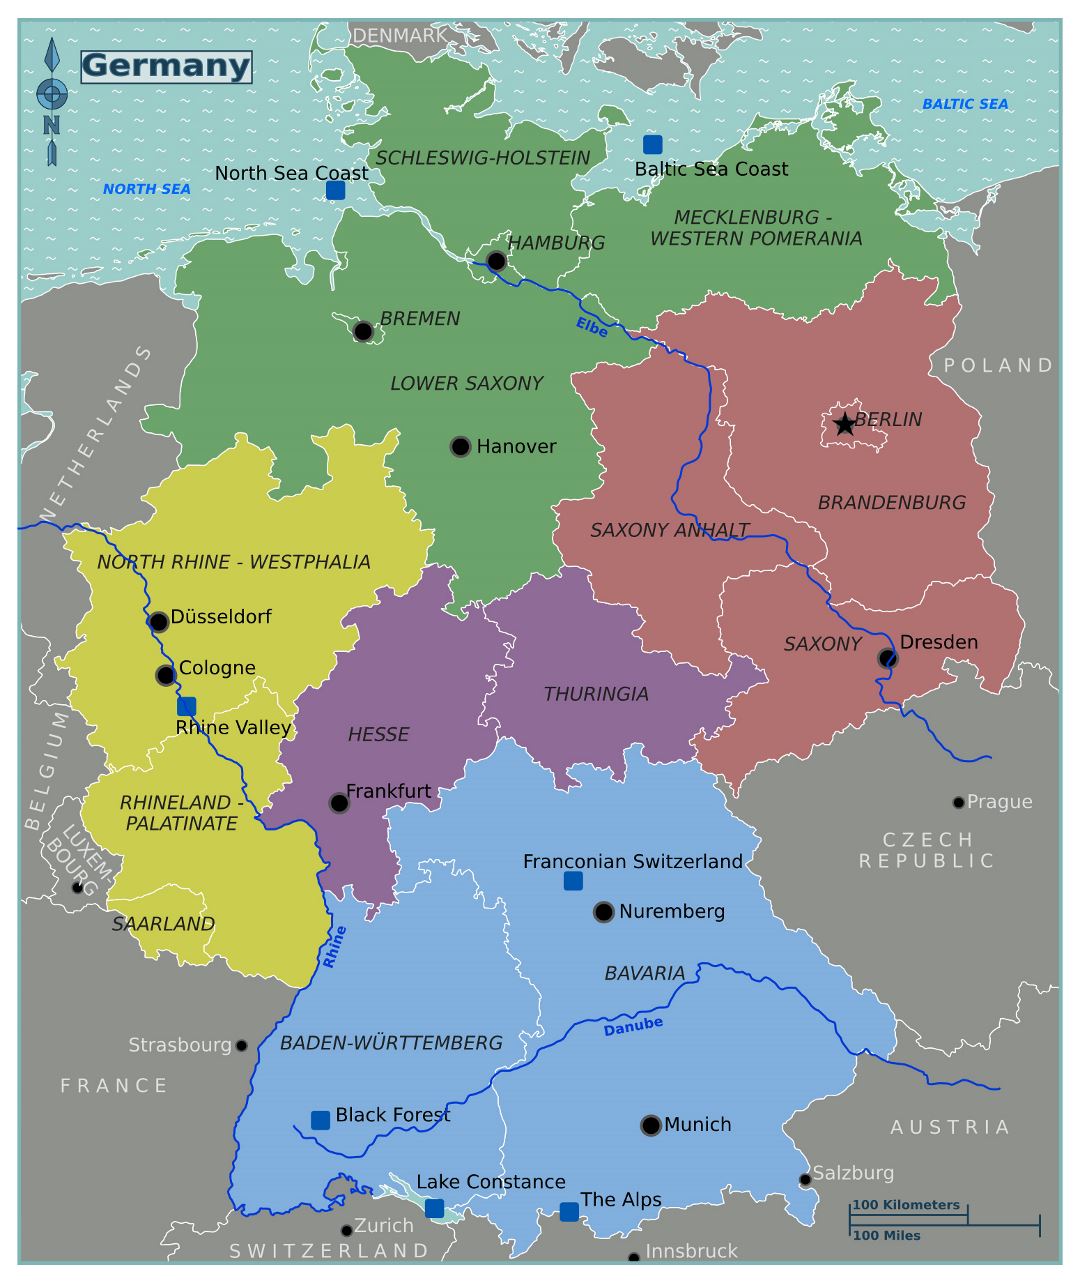 Large regions map of Germany